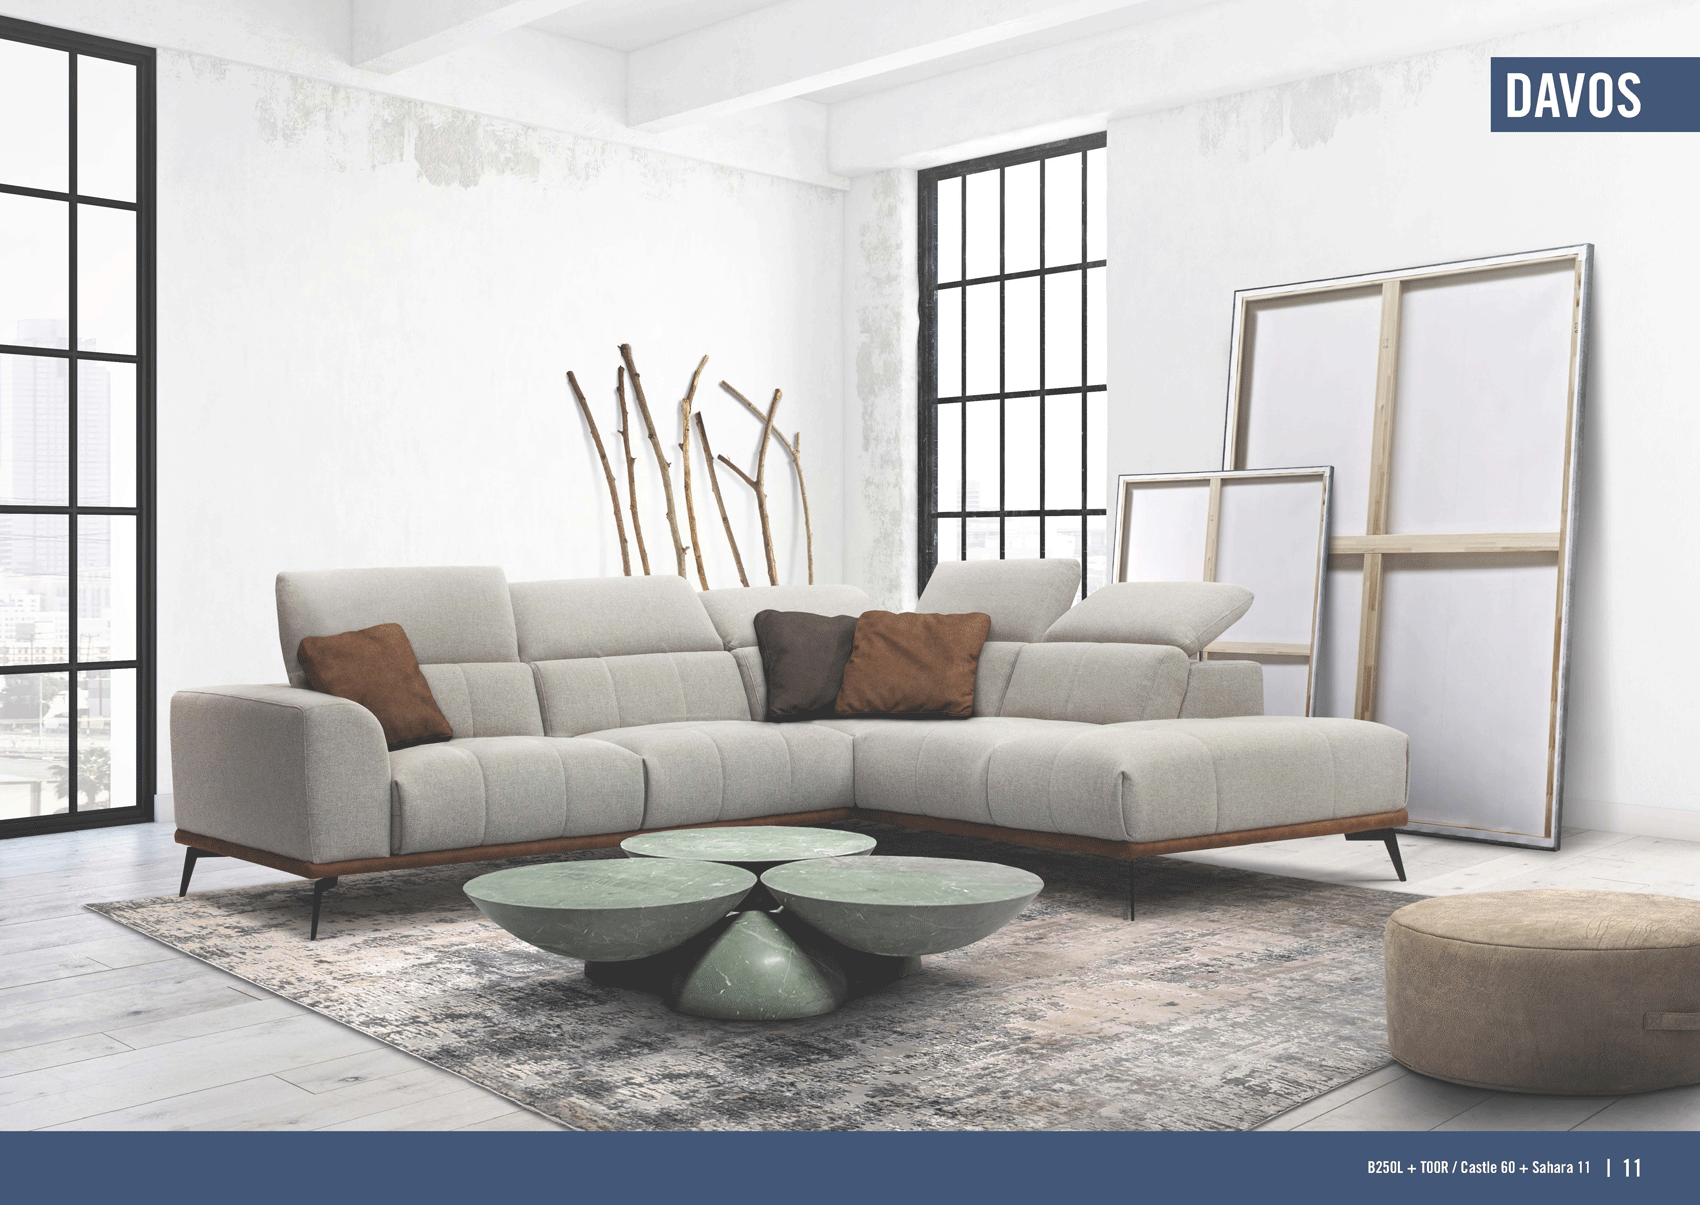 Living Room Furniture Sleepers Sofas Loveseats and Chairs Davos Sectional